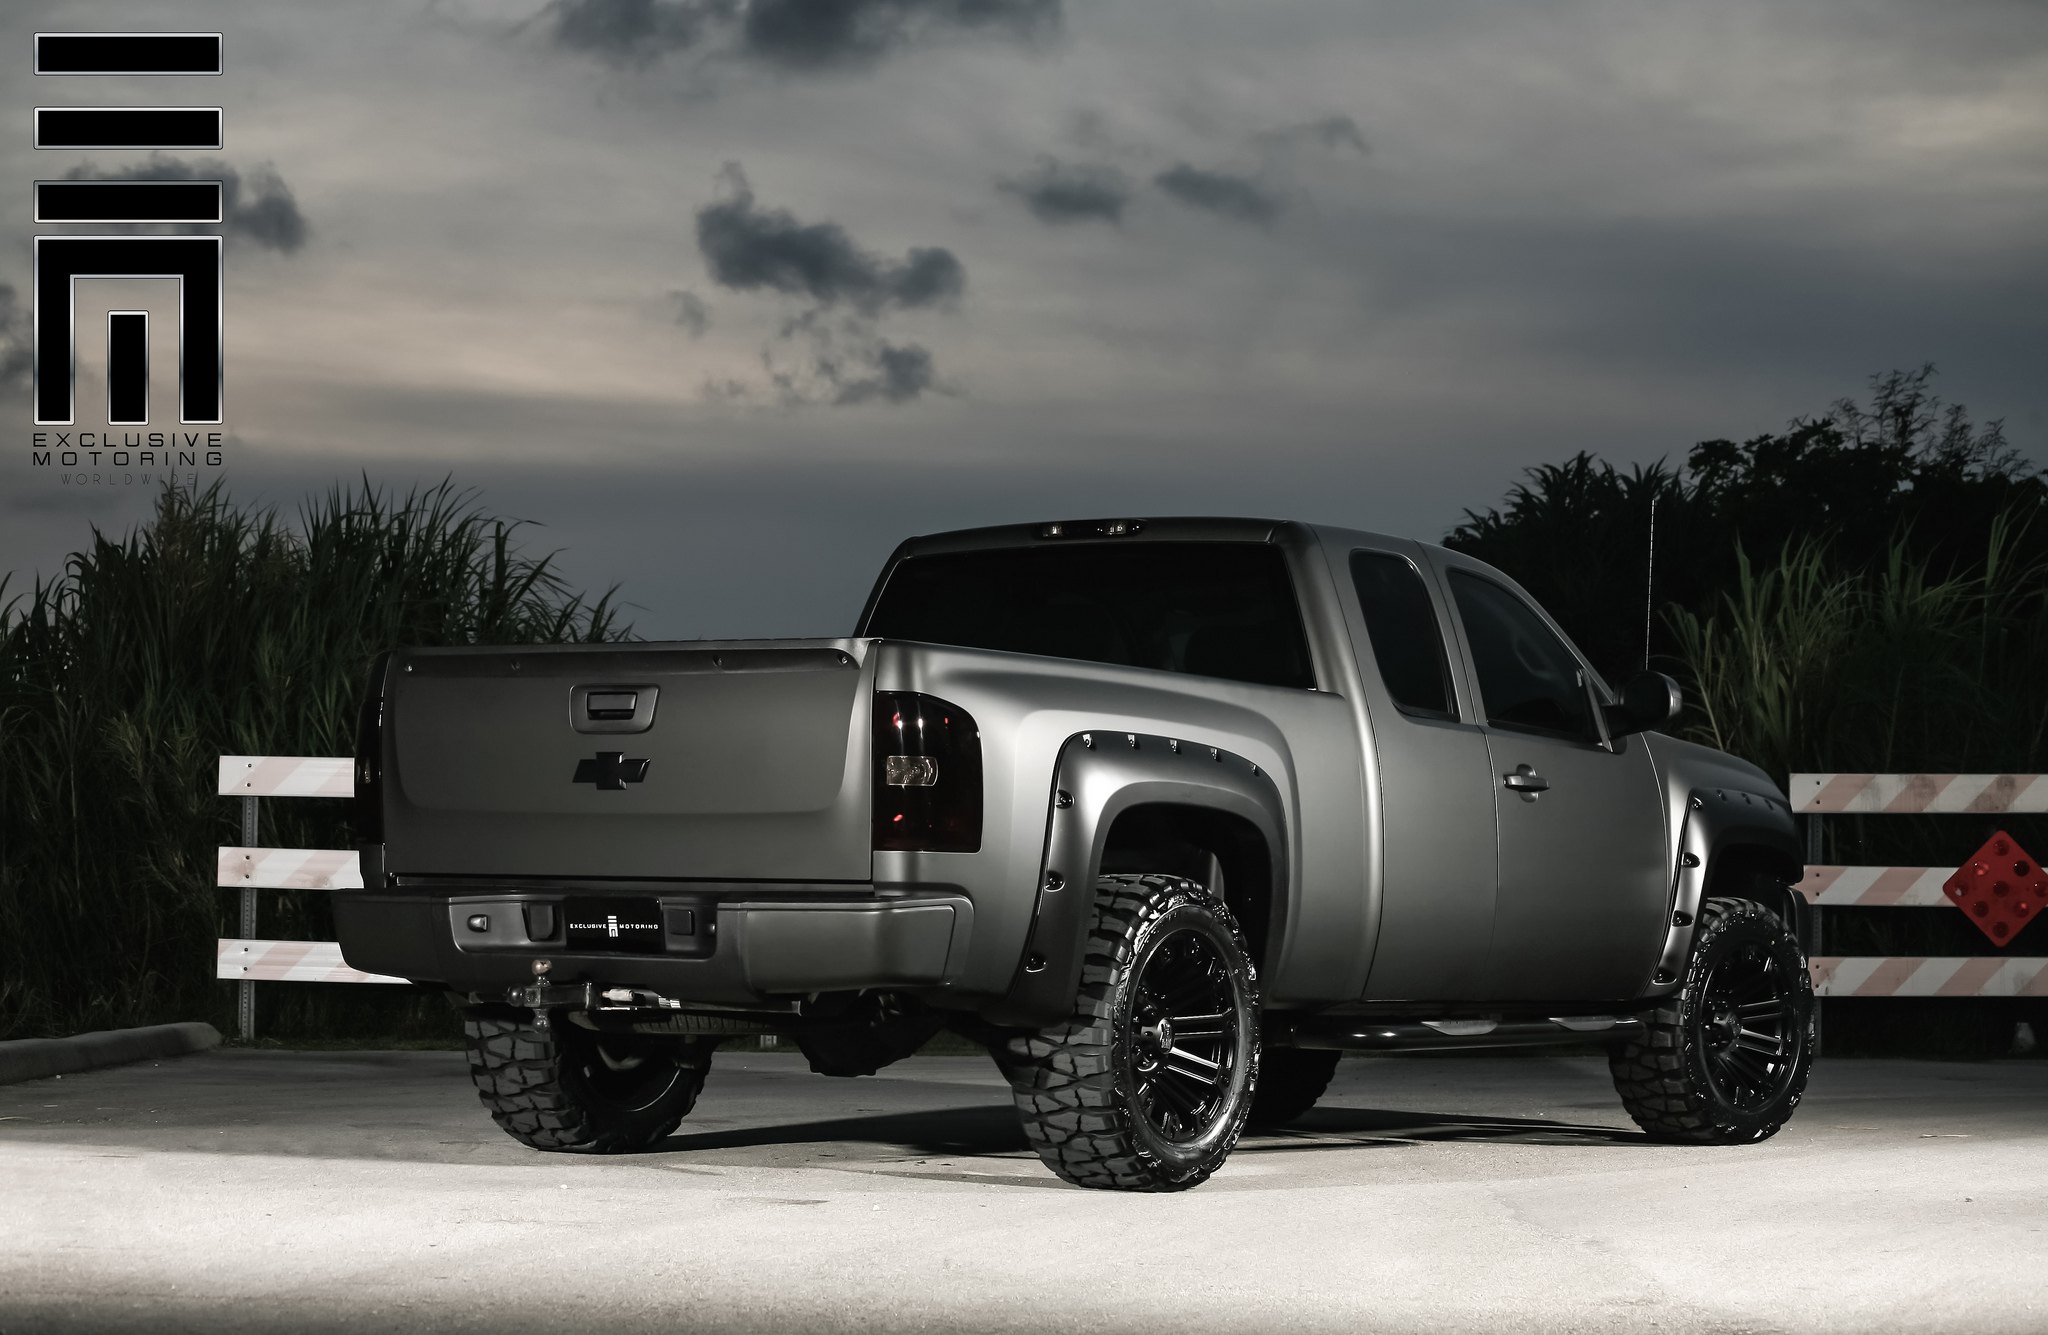 Matte Silverado fitted with custom fender flares - Photo by Exclusive Motoring